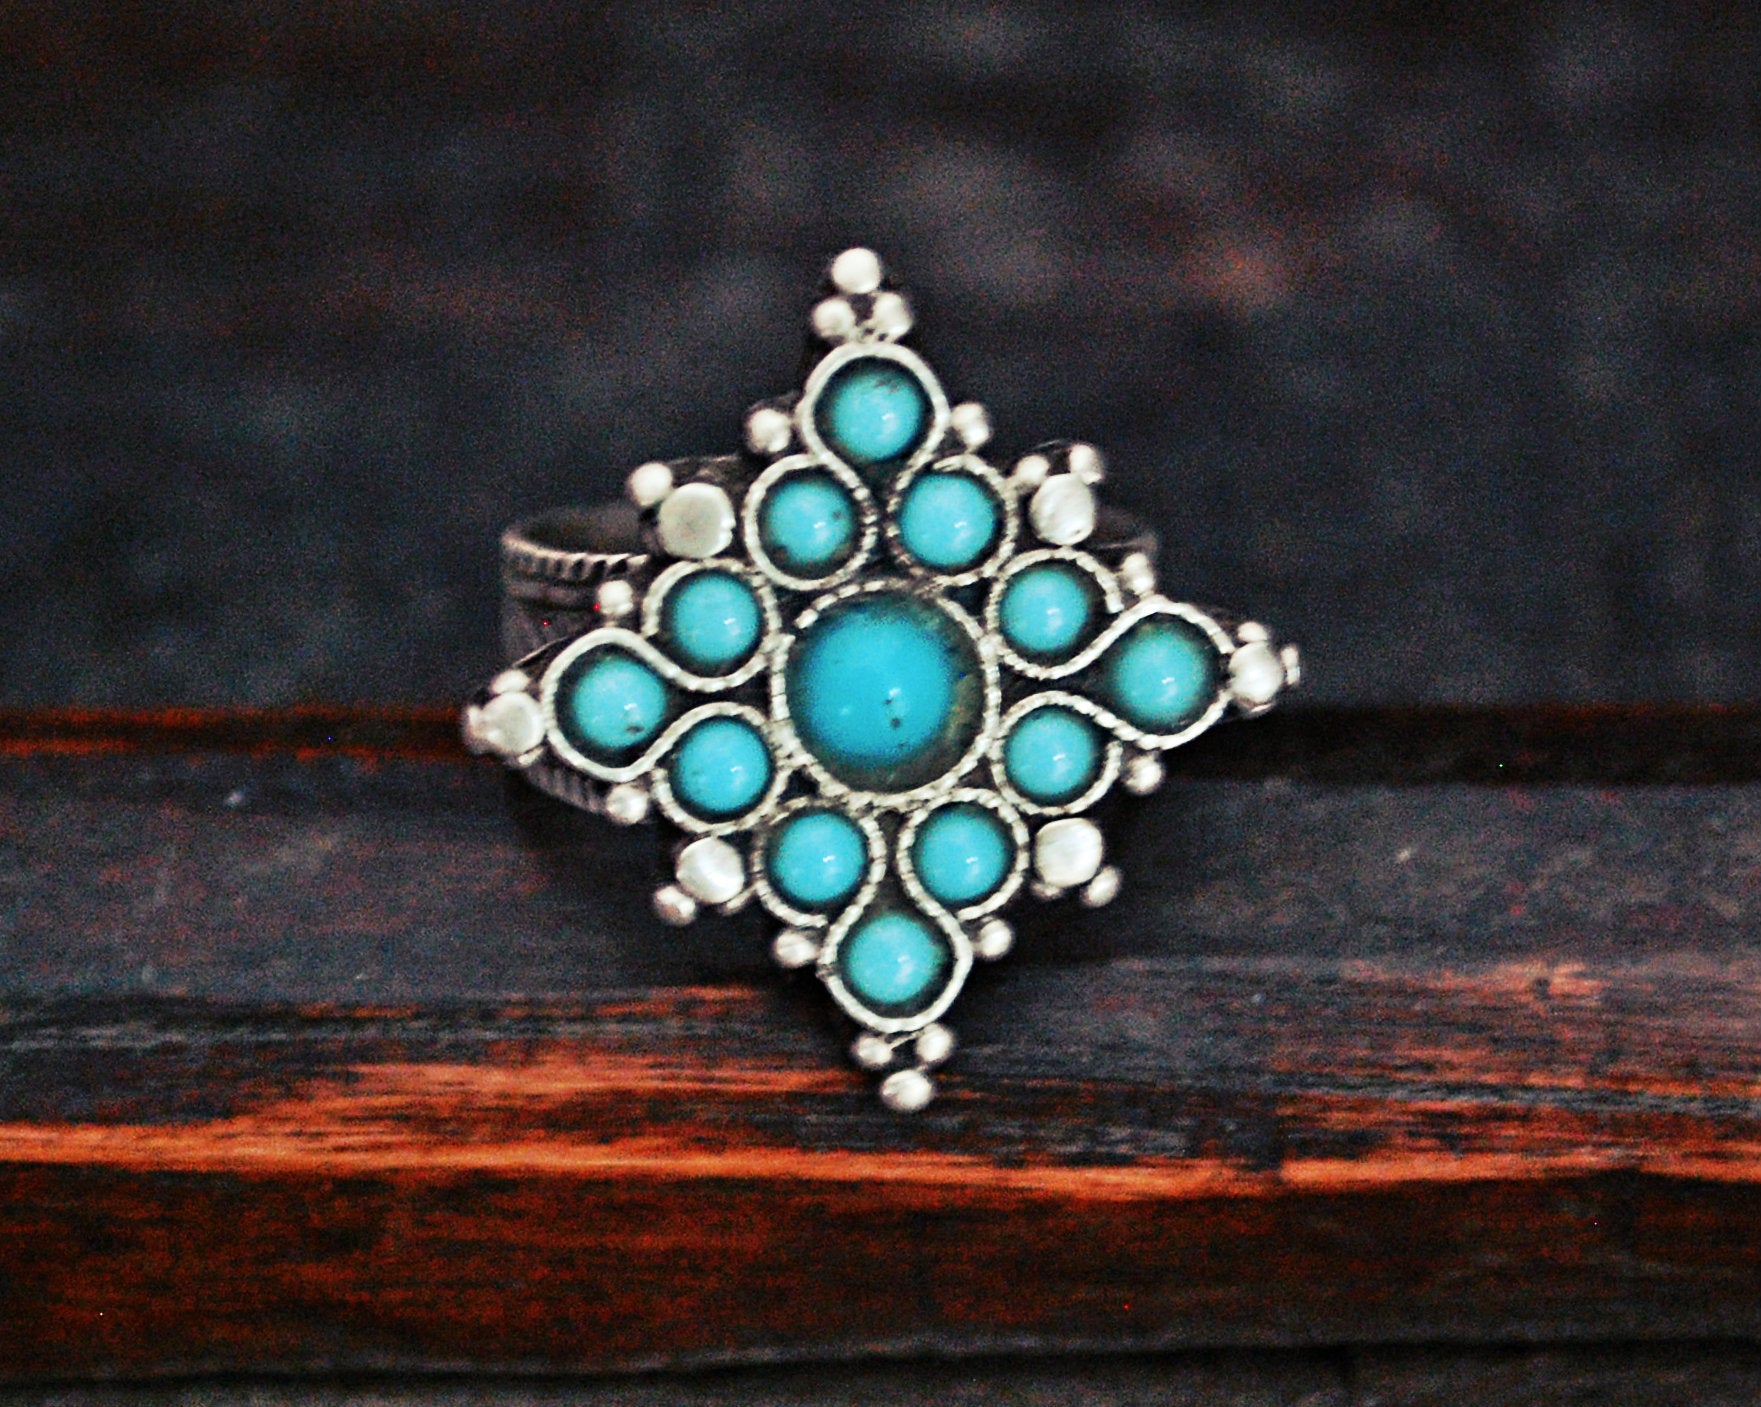 Antique Afghani Turquoise Ring - Size 8.5